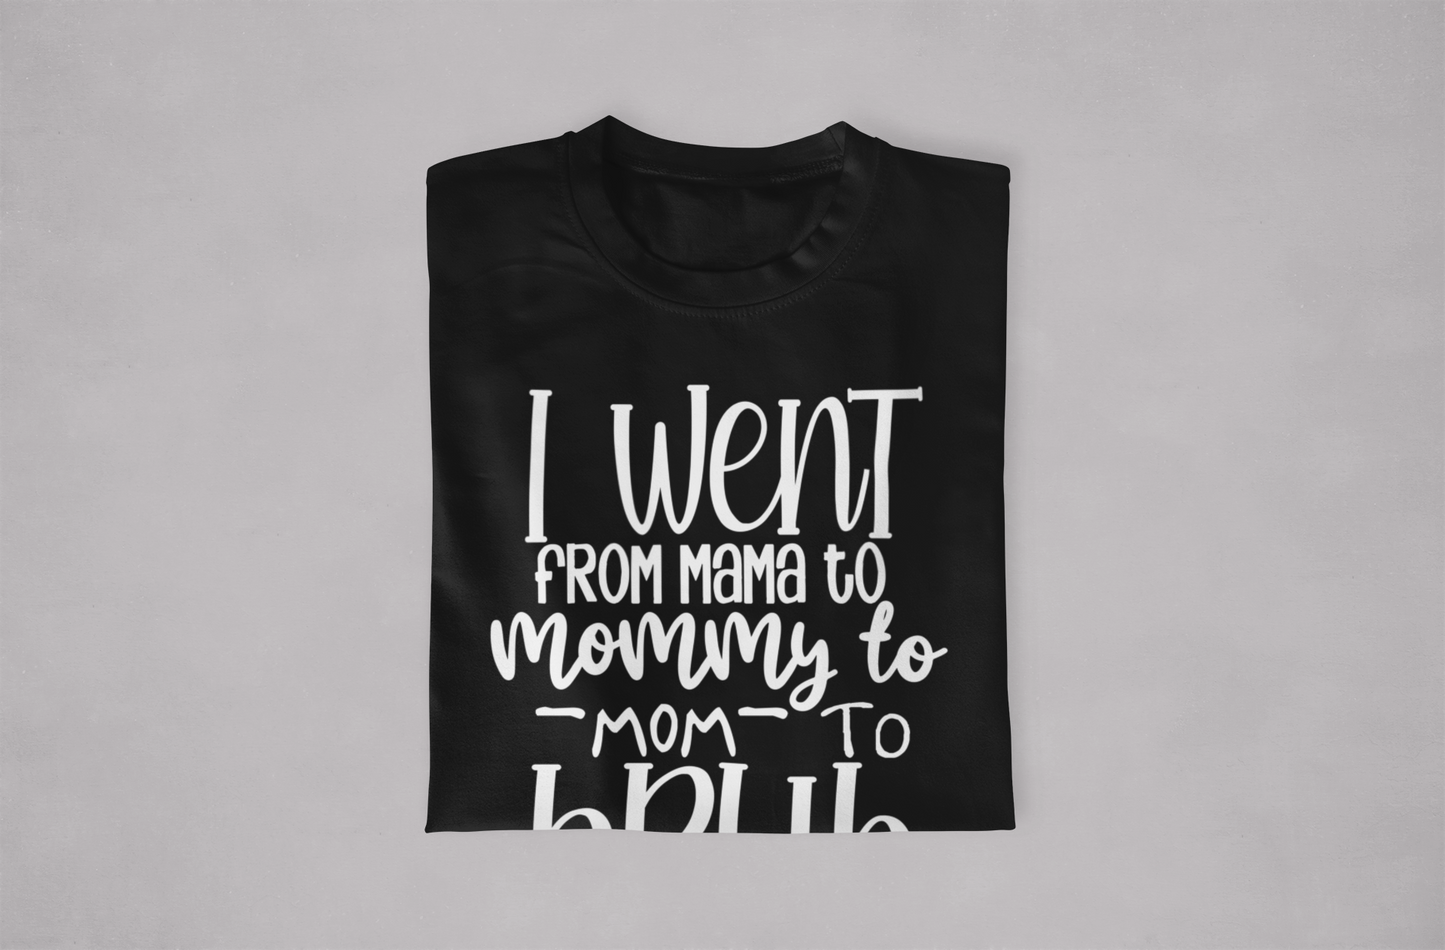 "Mom to Bruh" T-Shirt